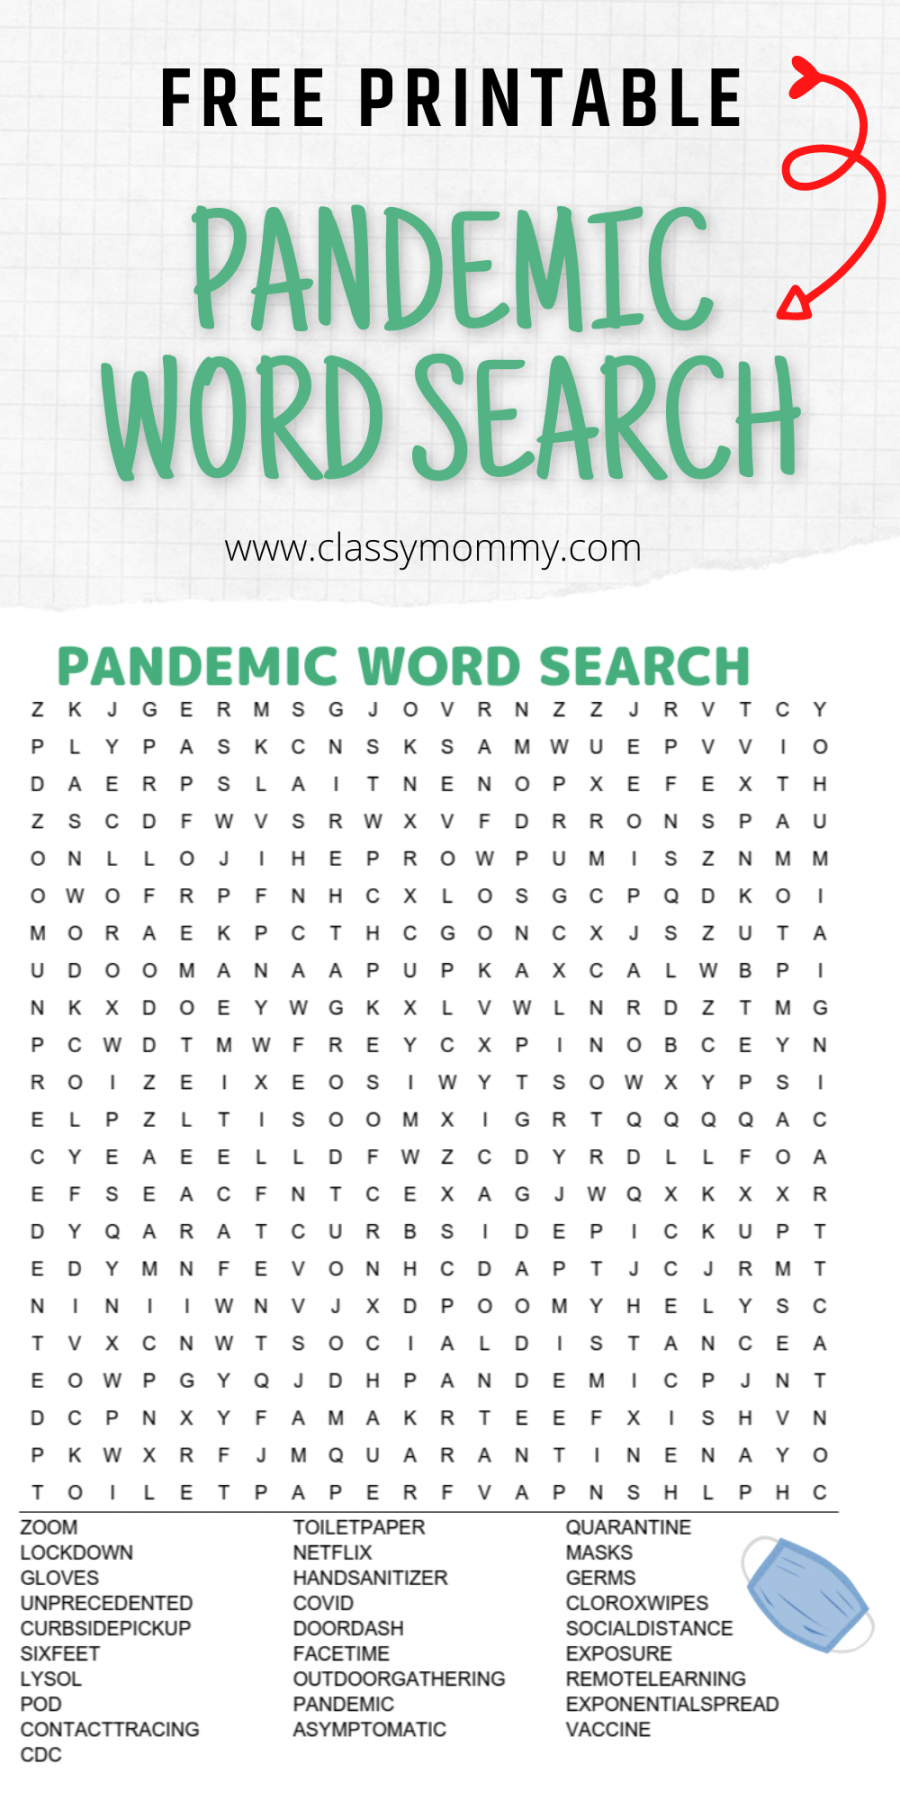 Printable Free Word Search - Printable - Free Printable Pandemic Word Search - Classy Mommy